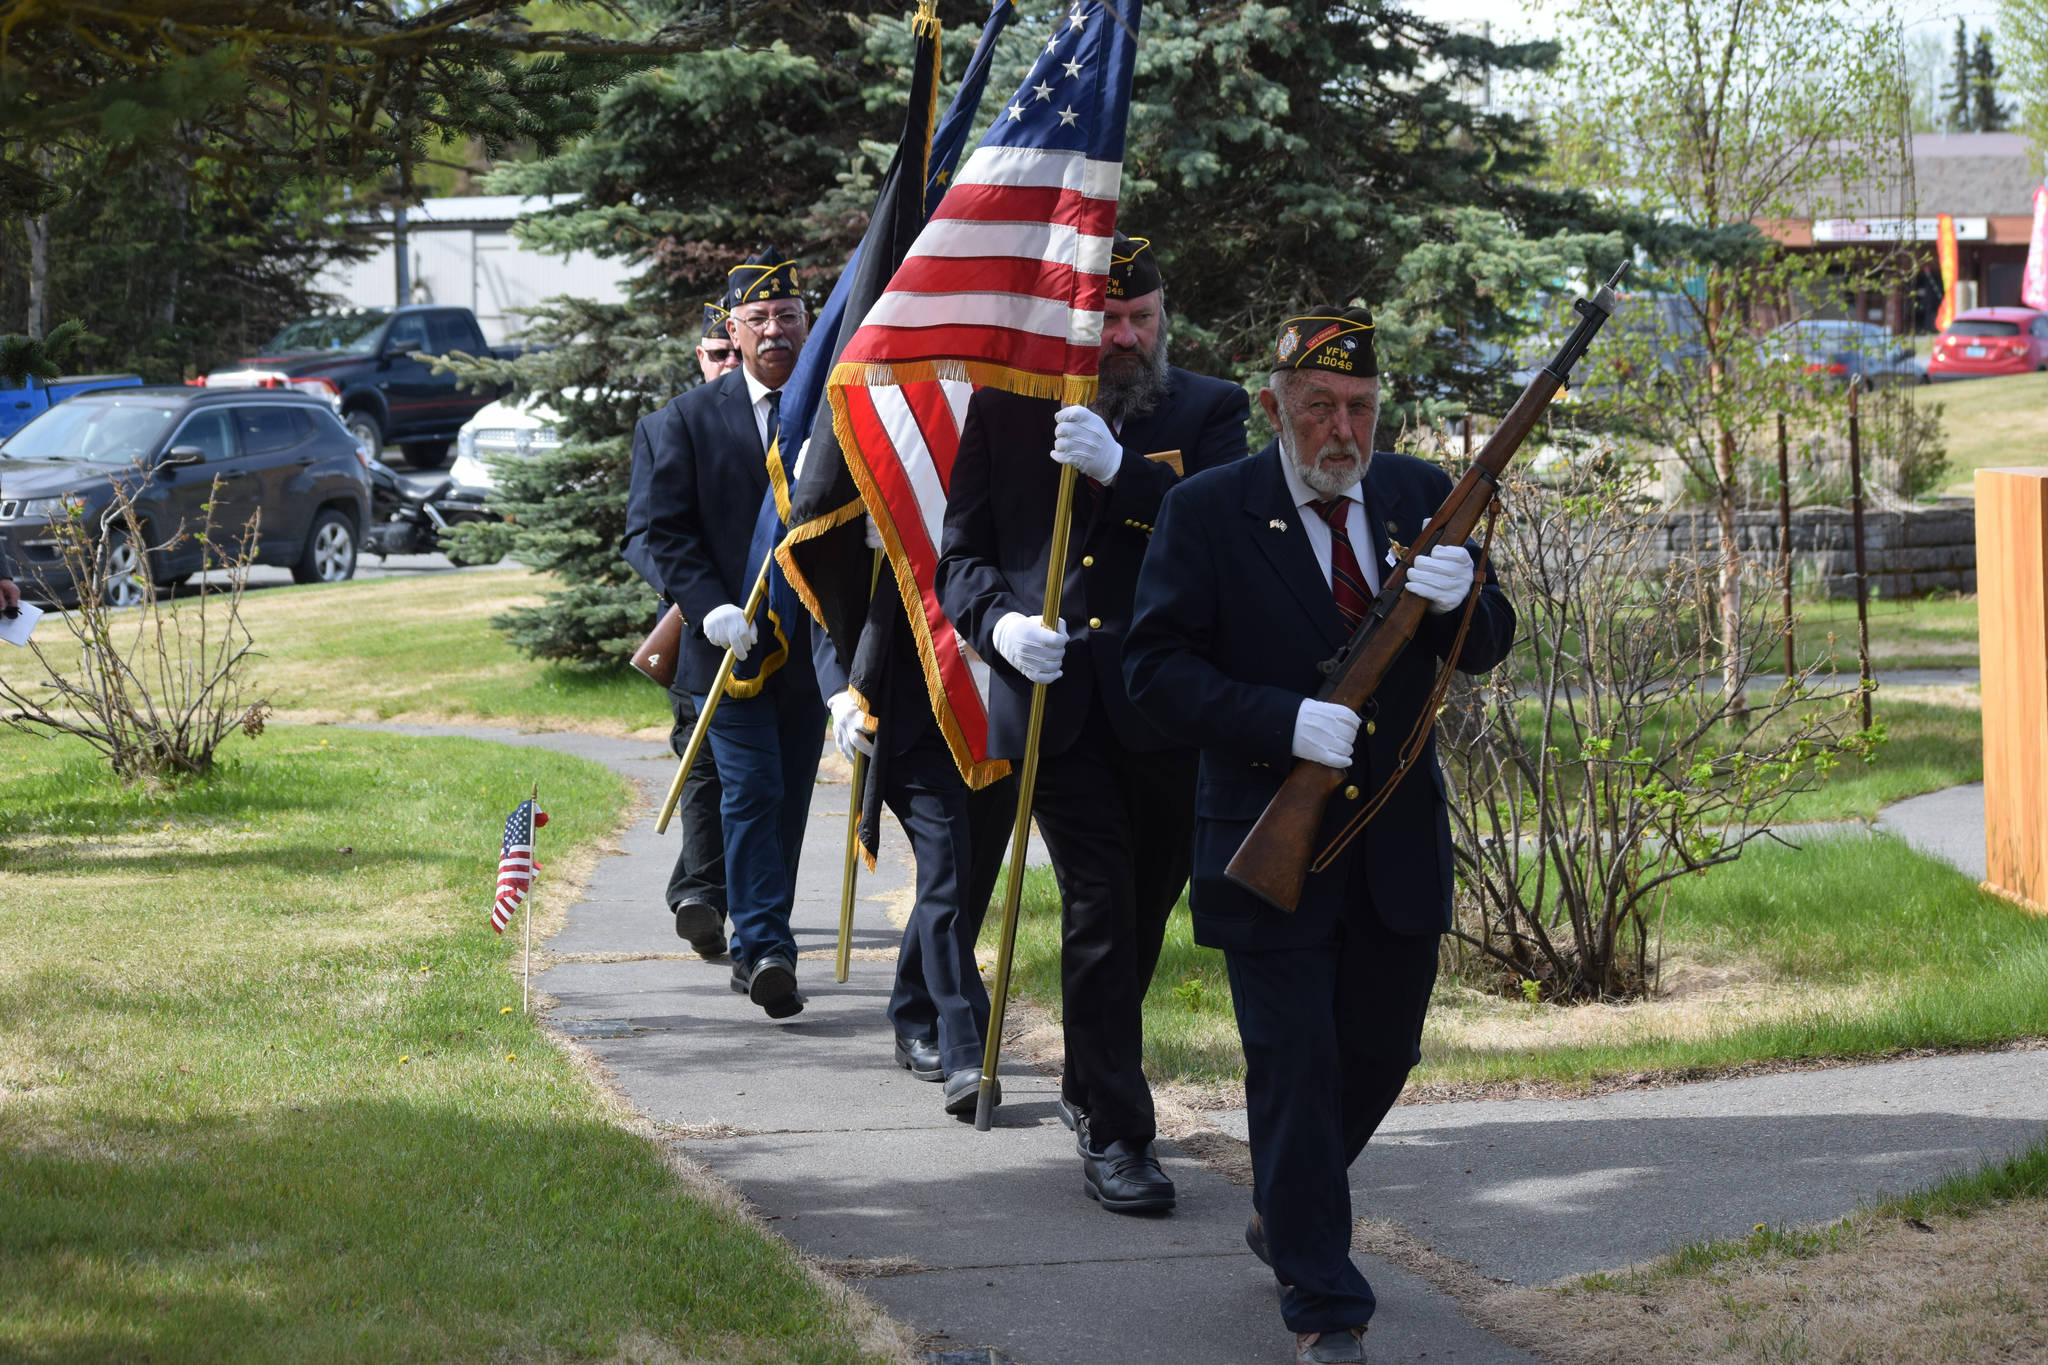 Honor Guard members proceed into the Memorial Day ceremony at Leif Hansen Memorial Park in Kenai, Alaska, on Monday, May 31, 2021. (Camille Botello/Peninsula Clarion)